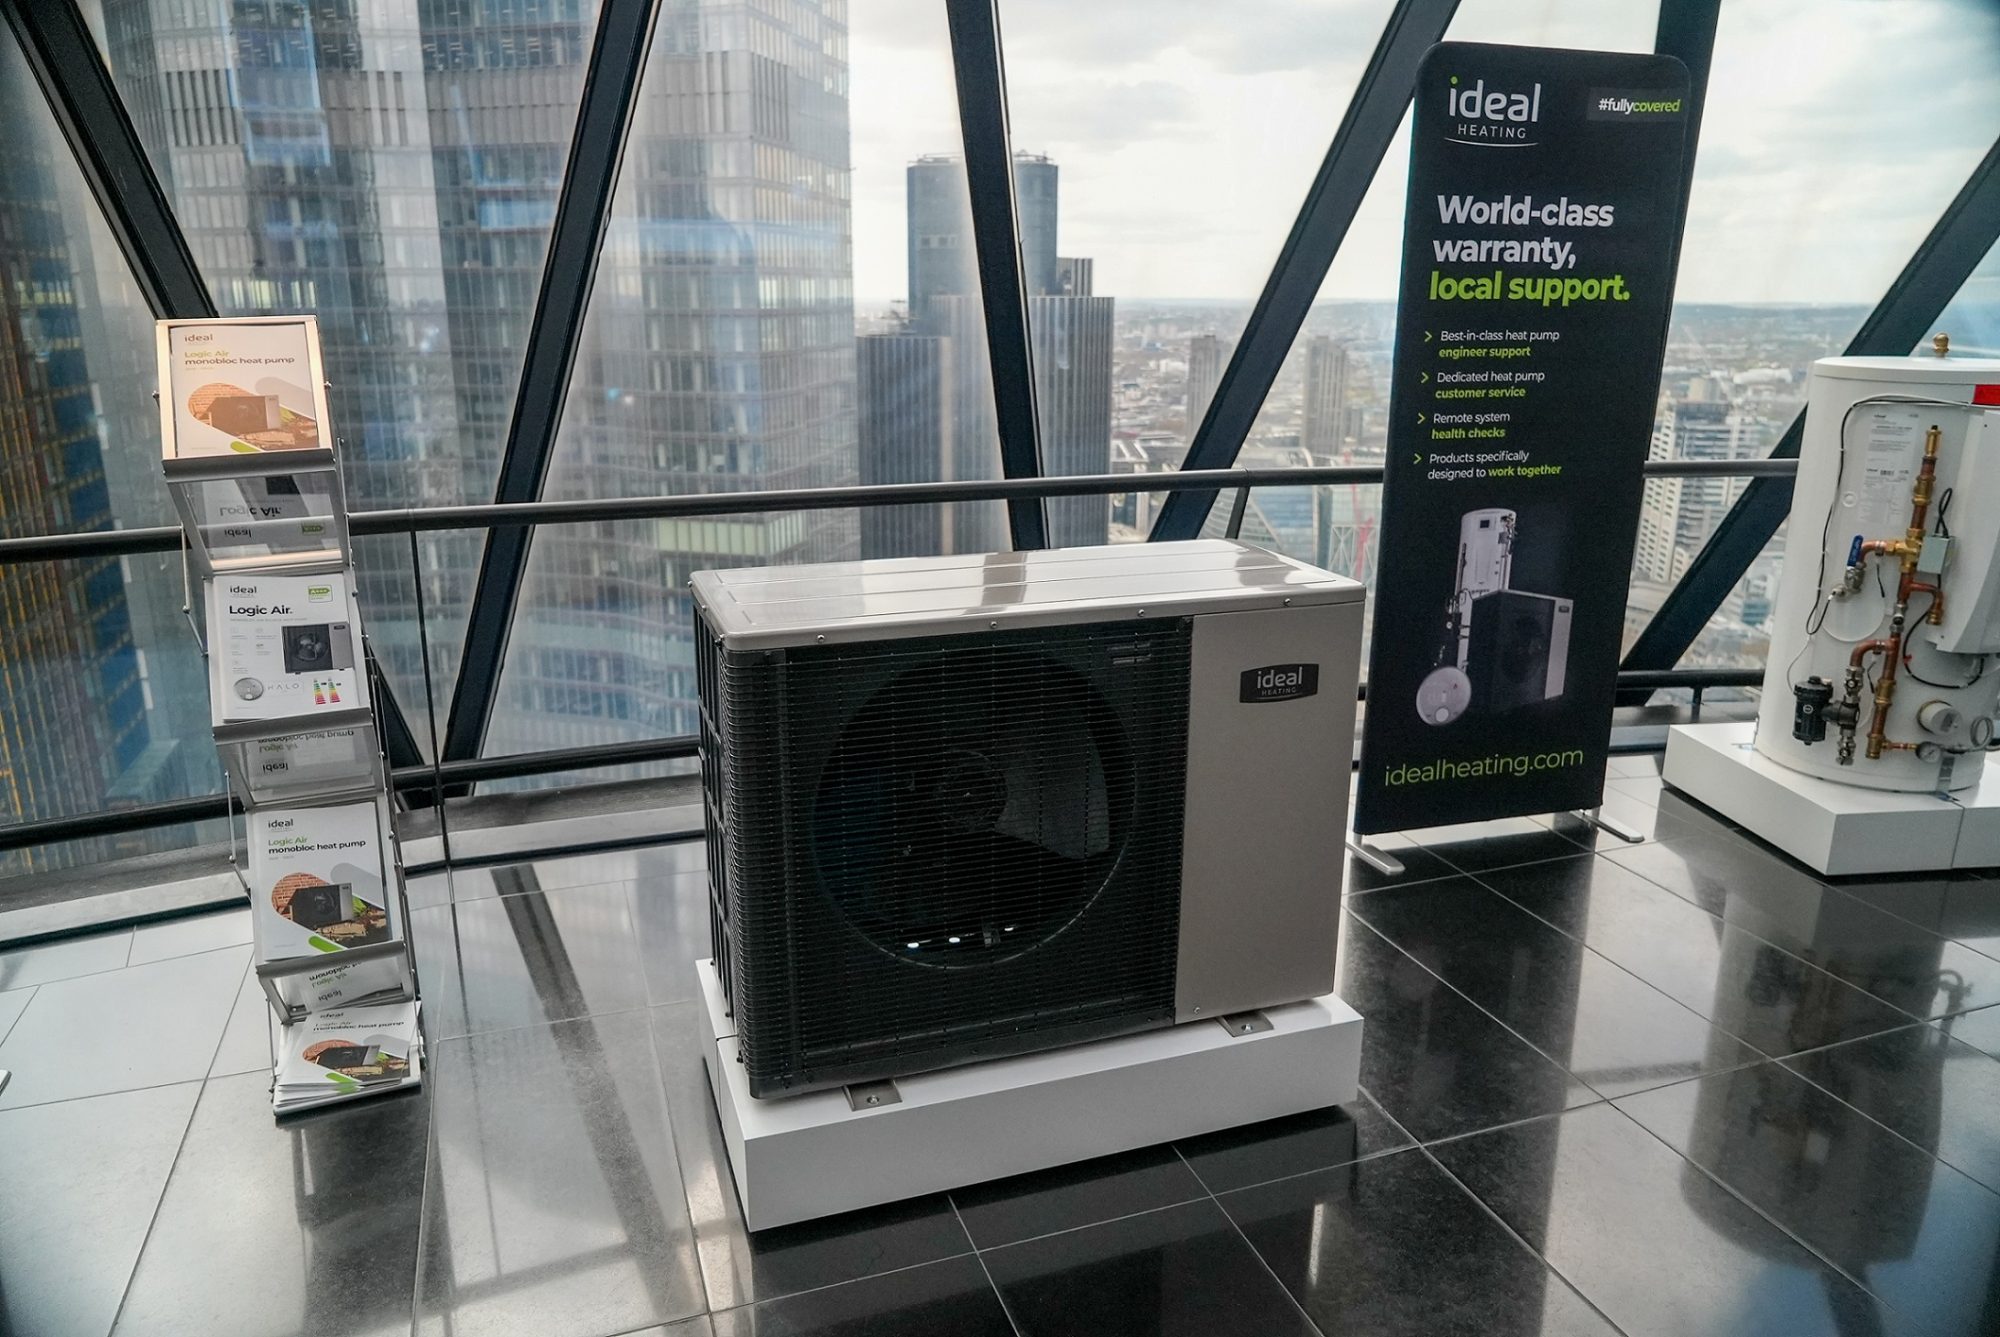 Ideal Heating’s new Logic Air heat pump was launched at a VIP event at The Gherkin skyscraper in London